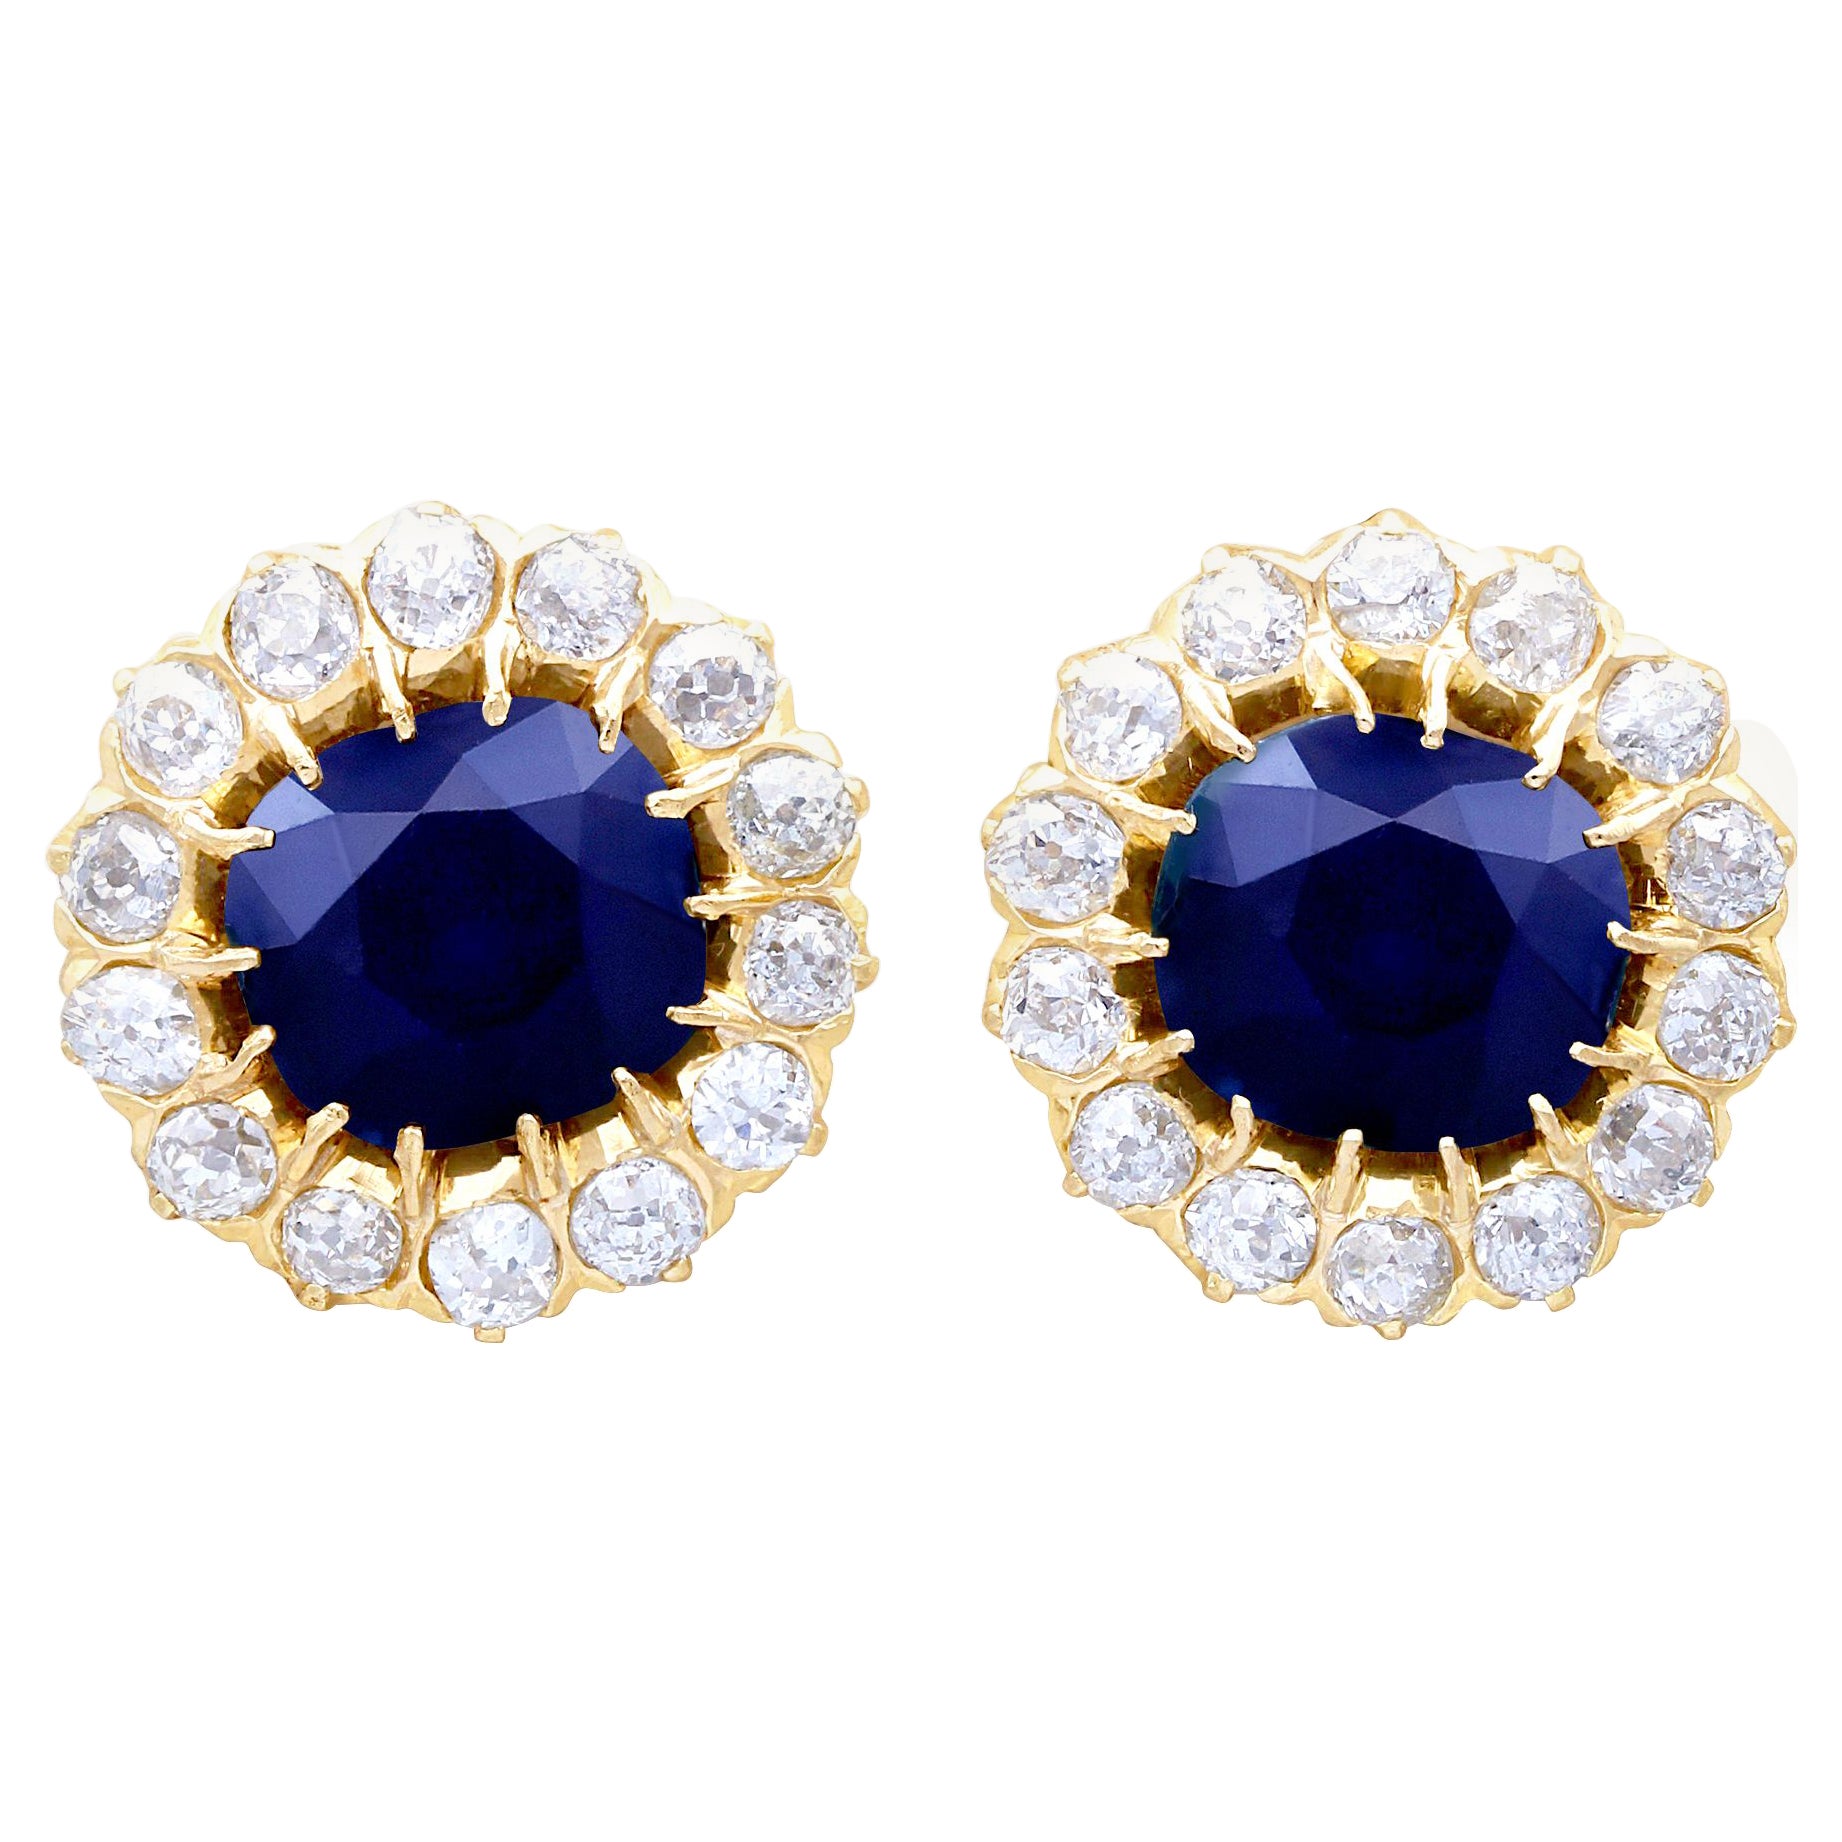 7.05Ct Sapphire and 2.31Ct Diamond Yellow Gold Cluster Earrings, Circa 1930